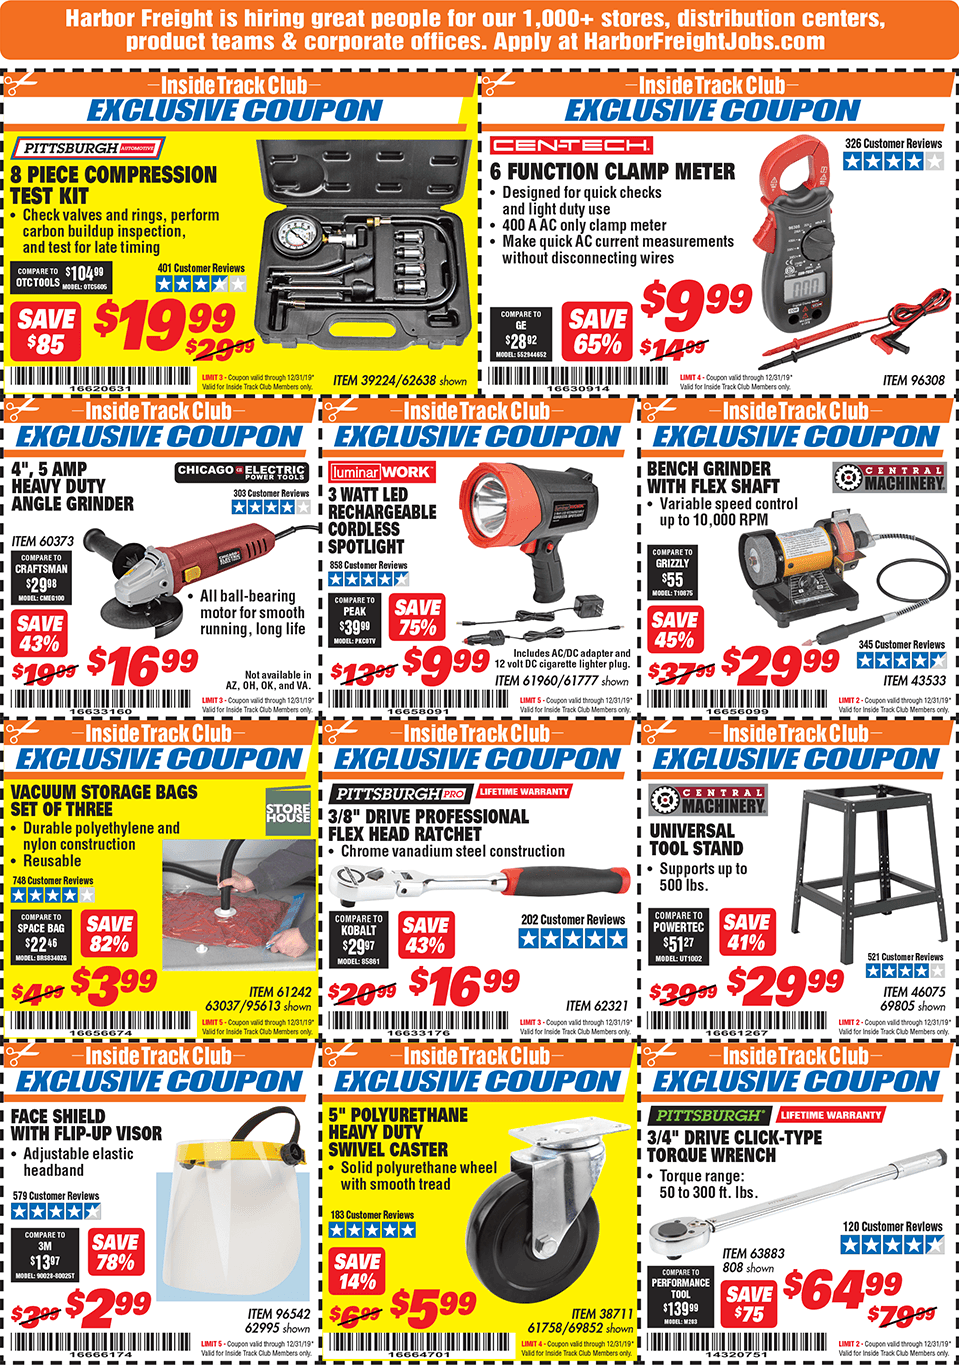 point of sales system at harbor freight tools